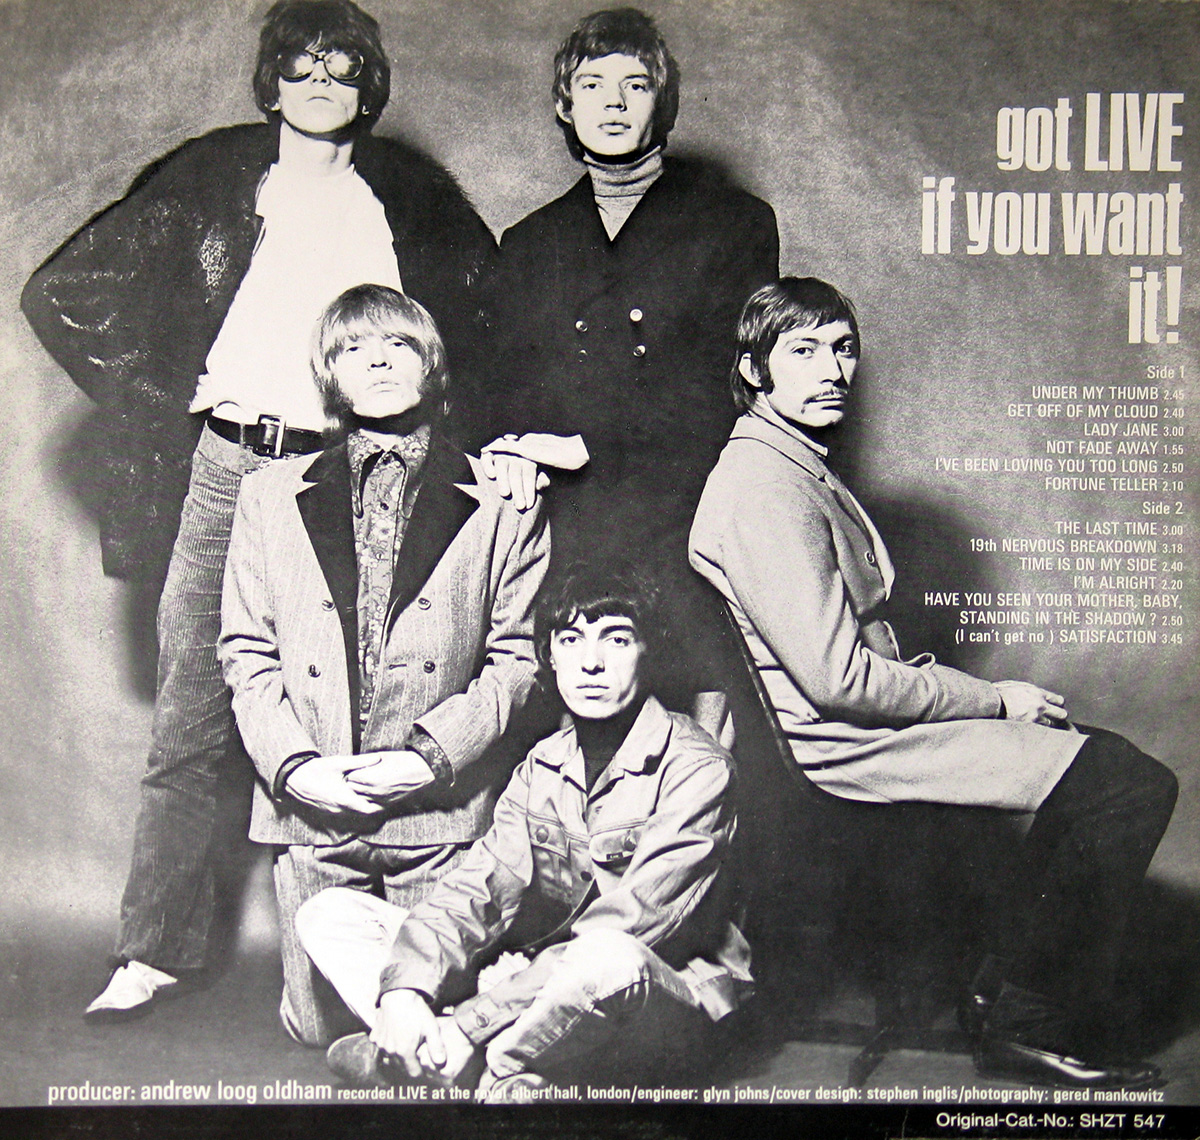 large album front cover photo of: Rolling Stones - Stone Age / Got Live if You Want it (2LP)  